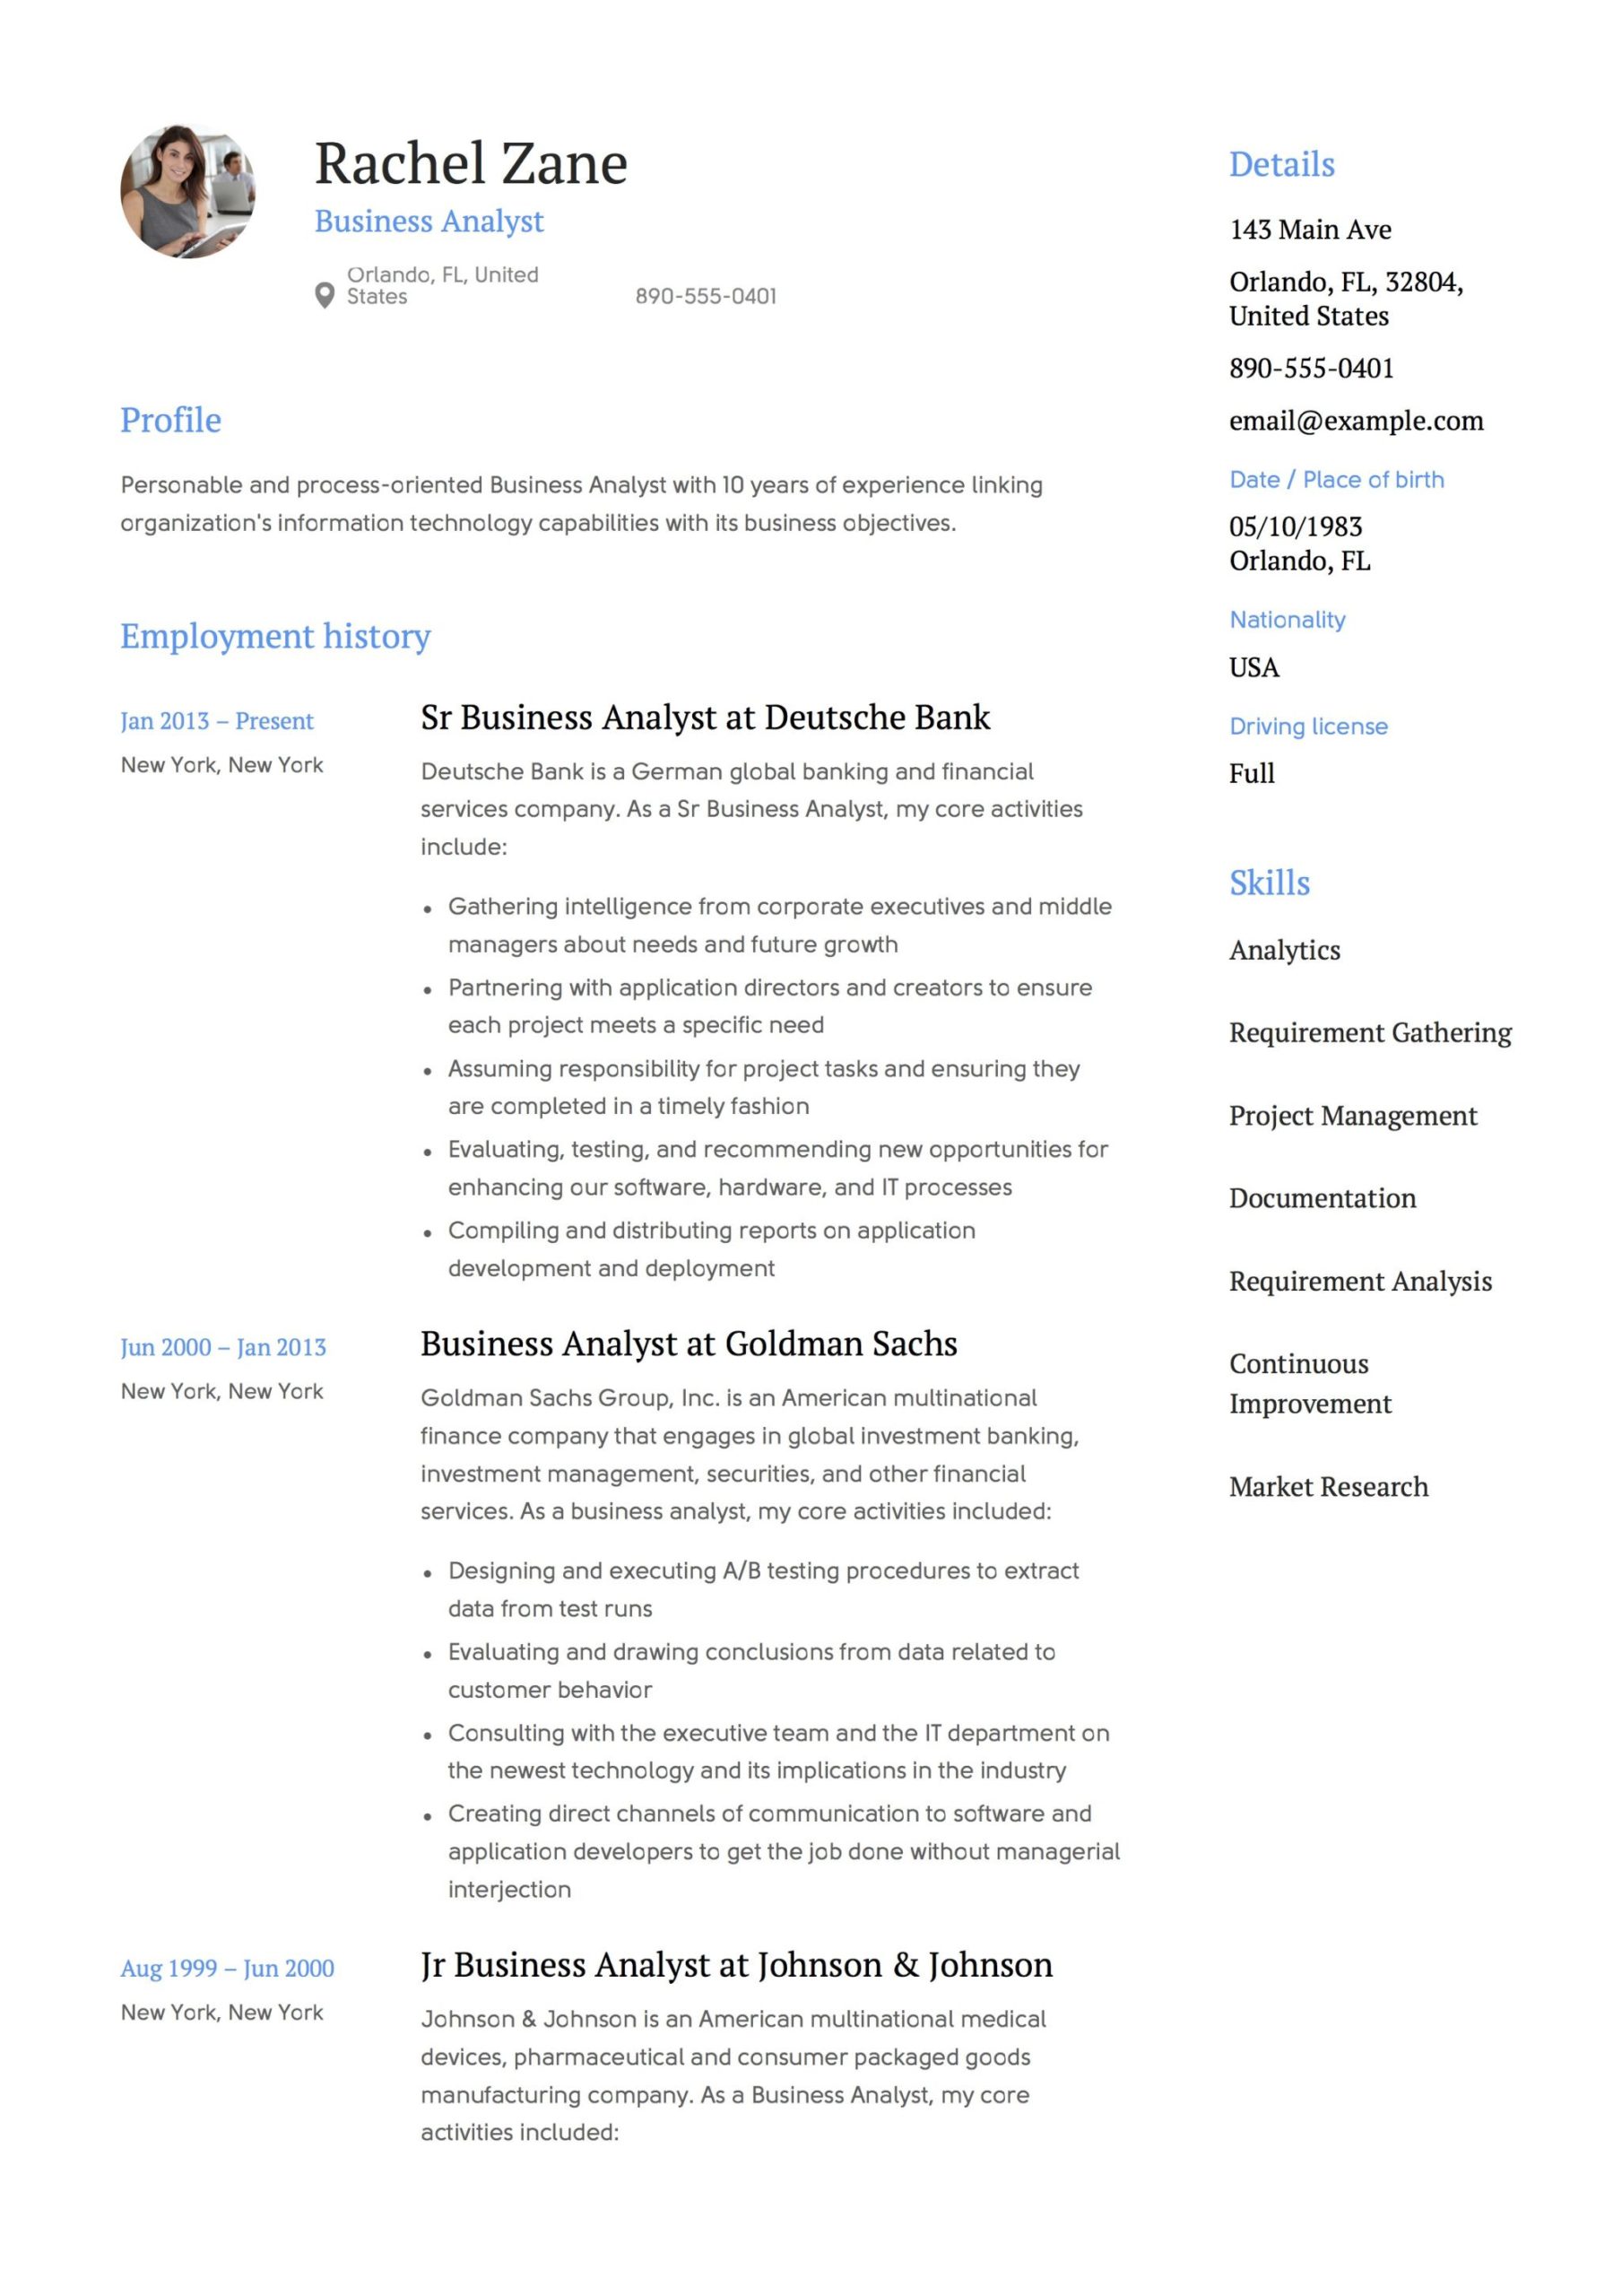 Business Analyst Resumes Samples for One Year Business Analyst Resume Examples & Writing Guide 2022